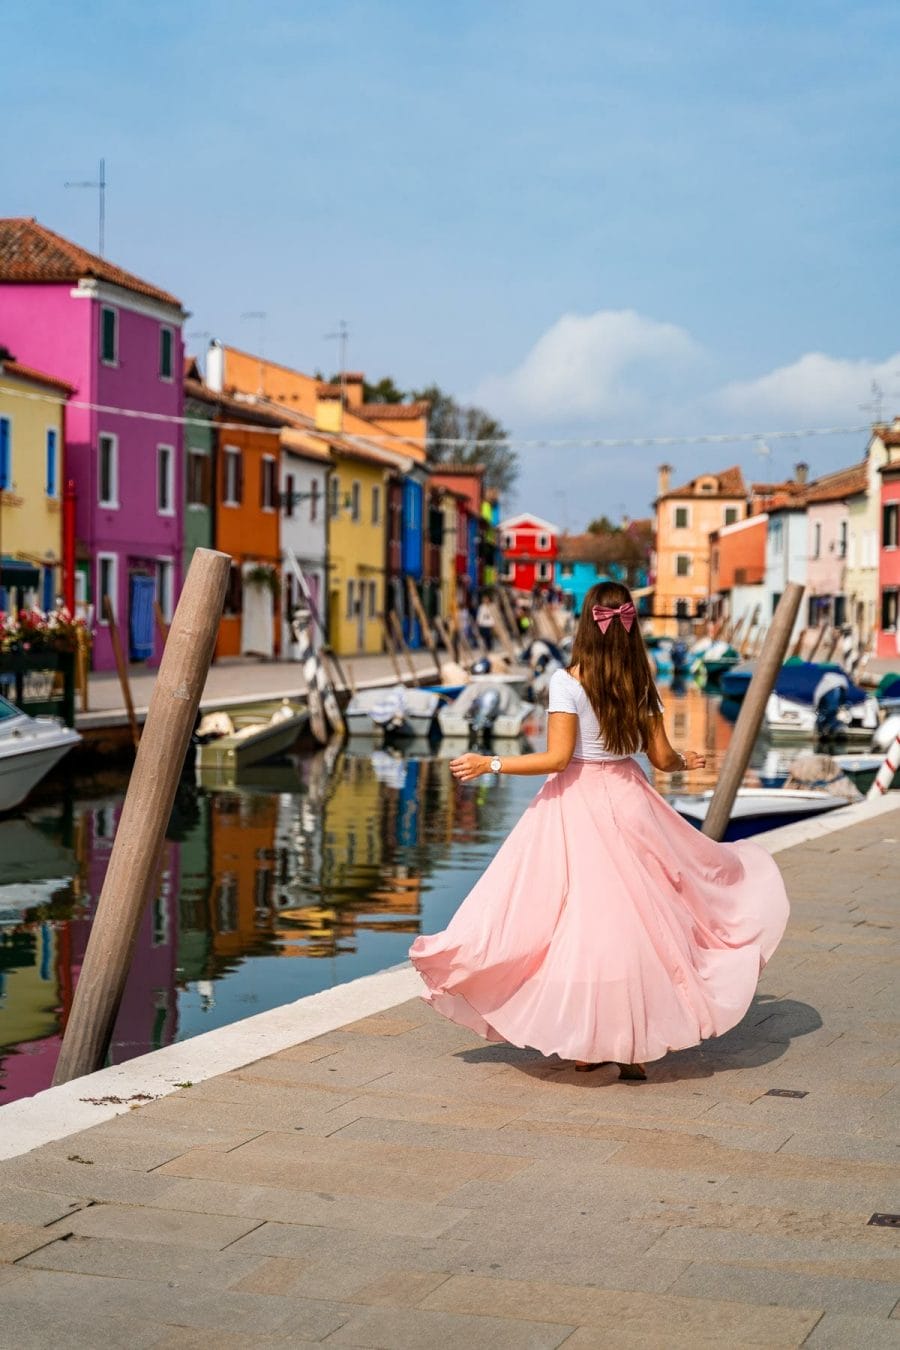 Girl in a pink skirt twirling in front of the colorful houses in Burano